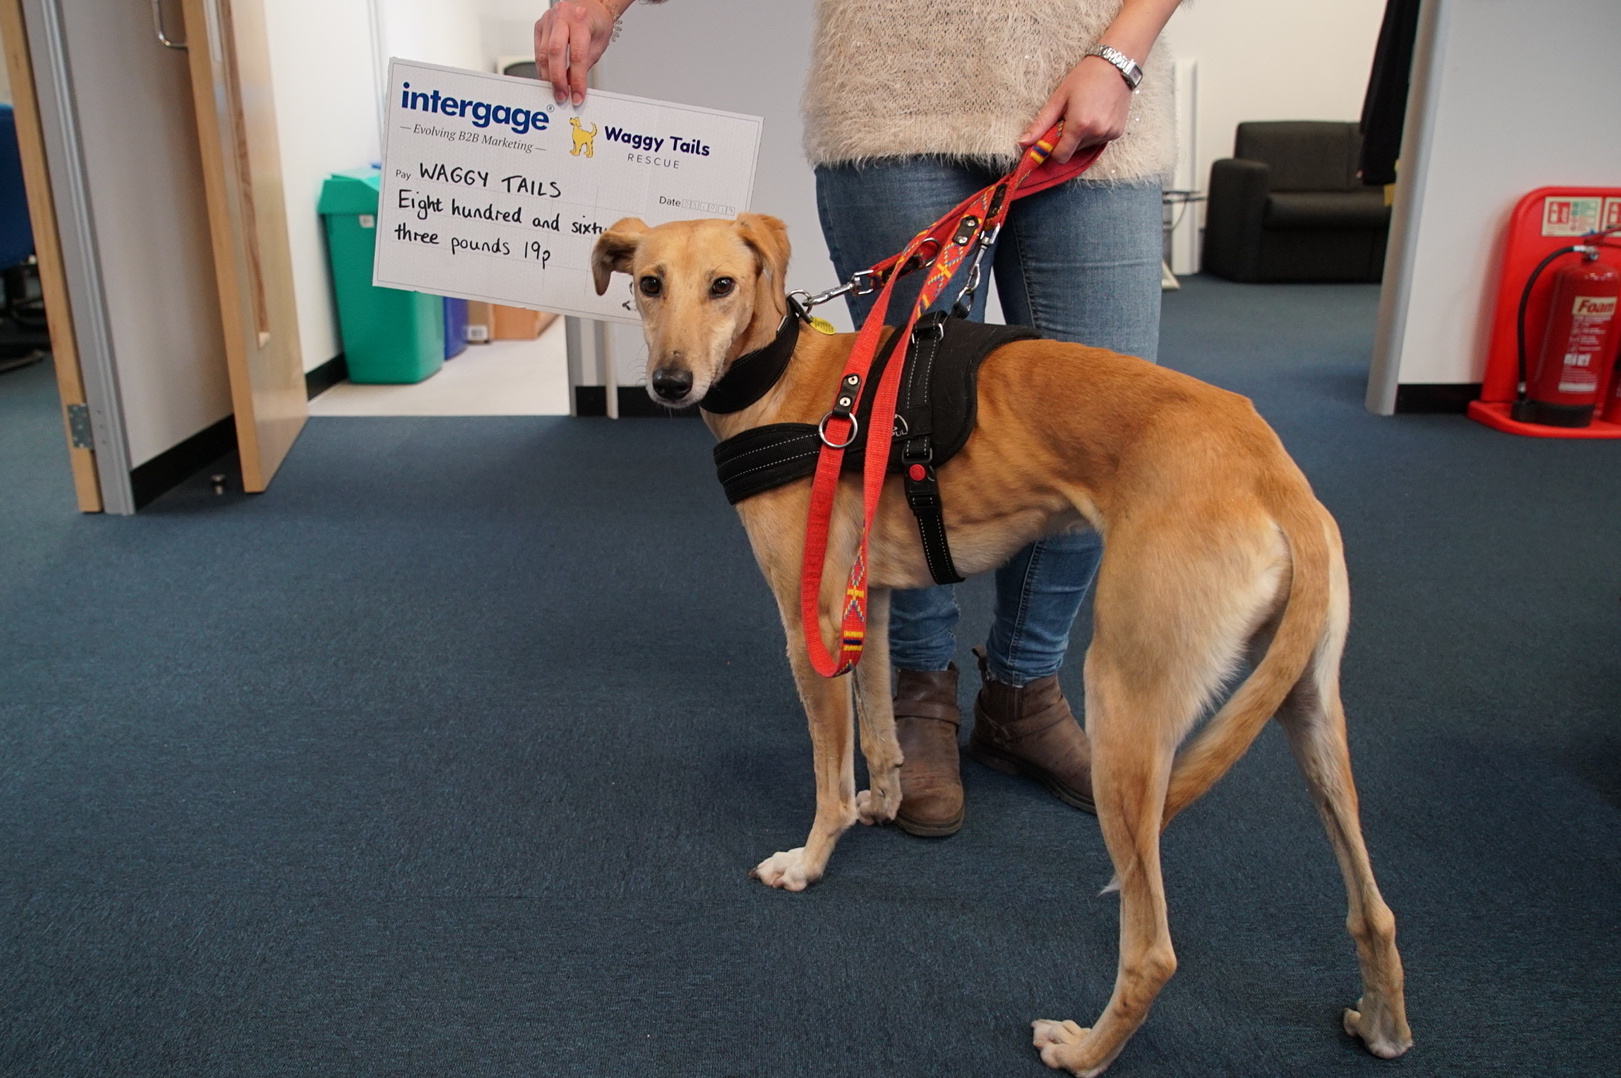 Dog-Friendly Intergage Adopts Waggy Tails as its chosen charity